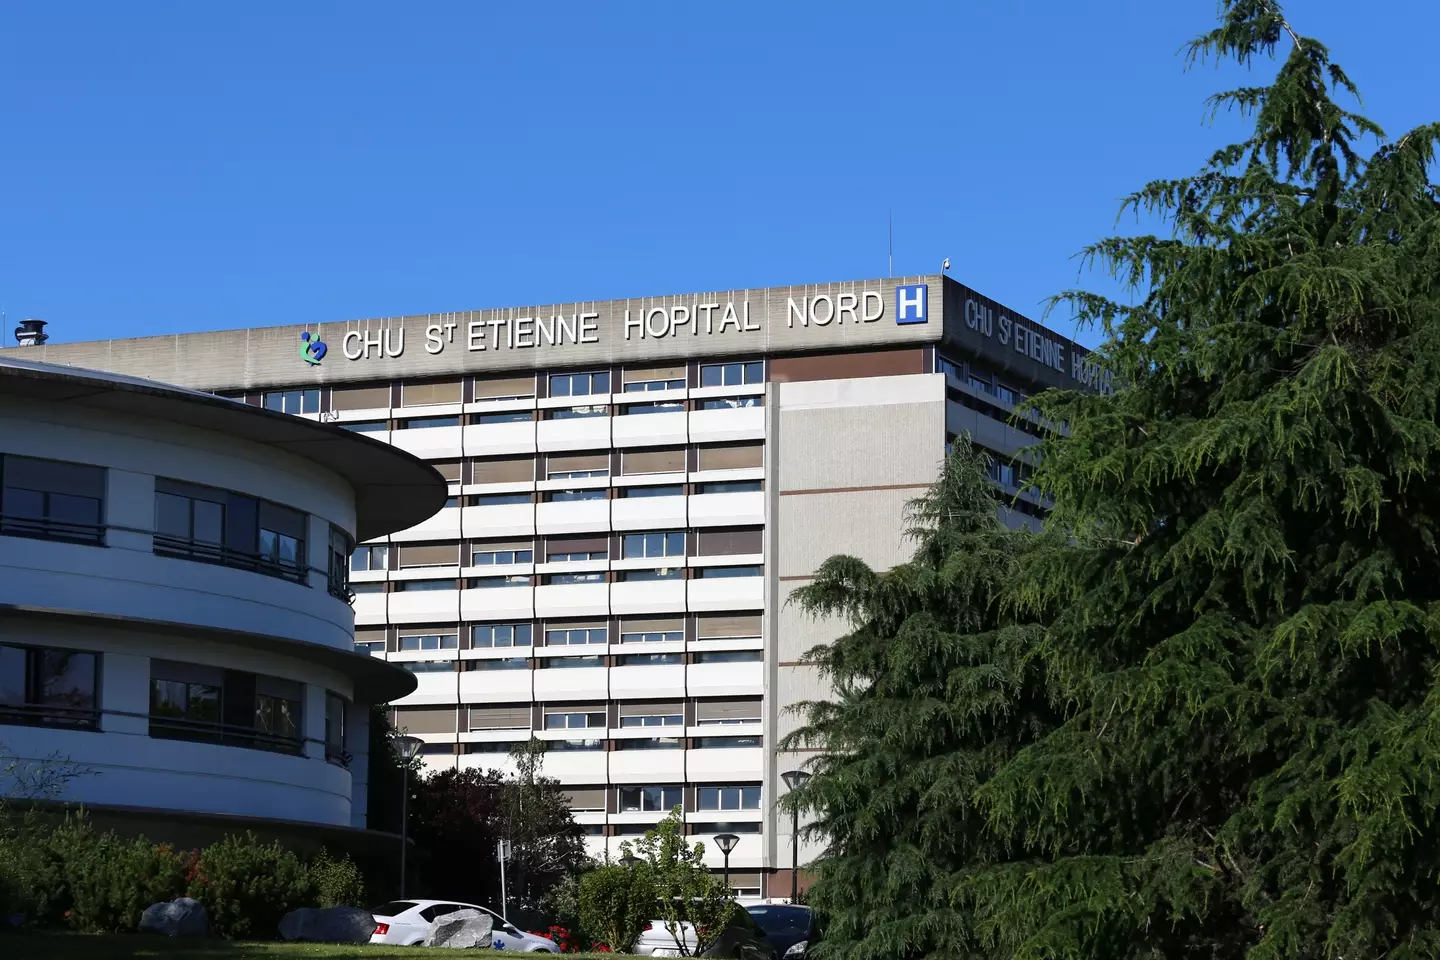 The 53-year-old was admitted to the University Hospital of Saint-Etienne after complaining his right eye had been itching for several hours.